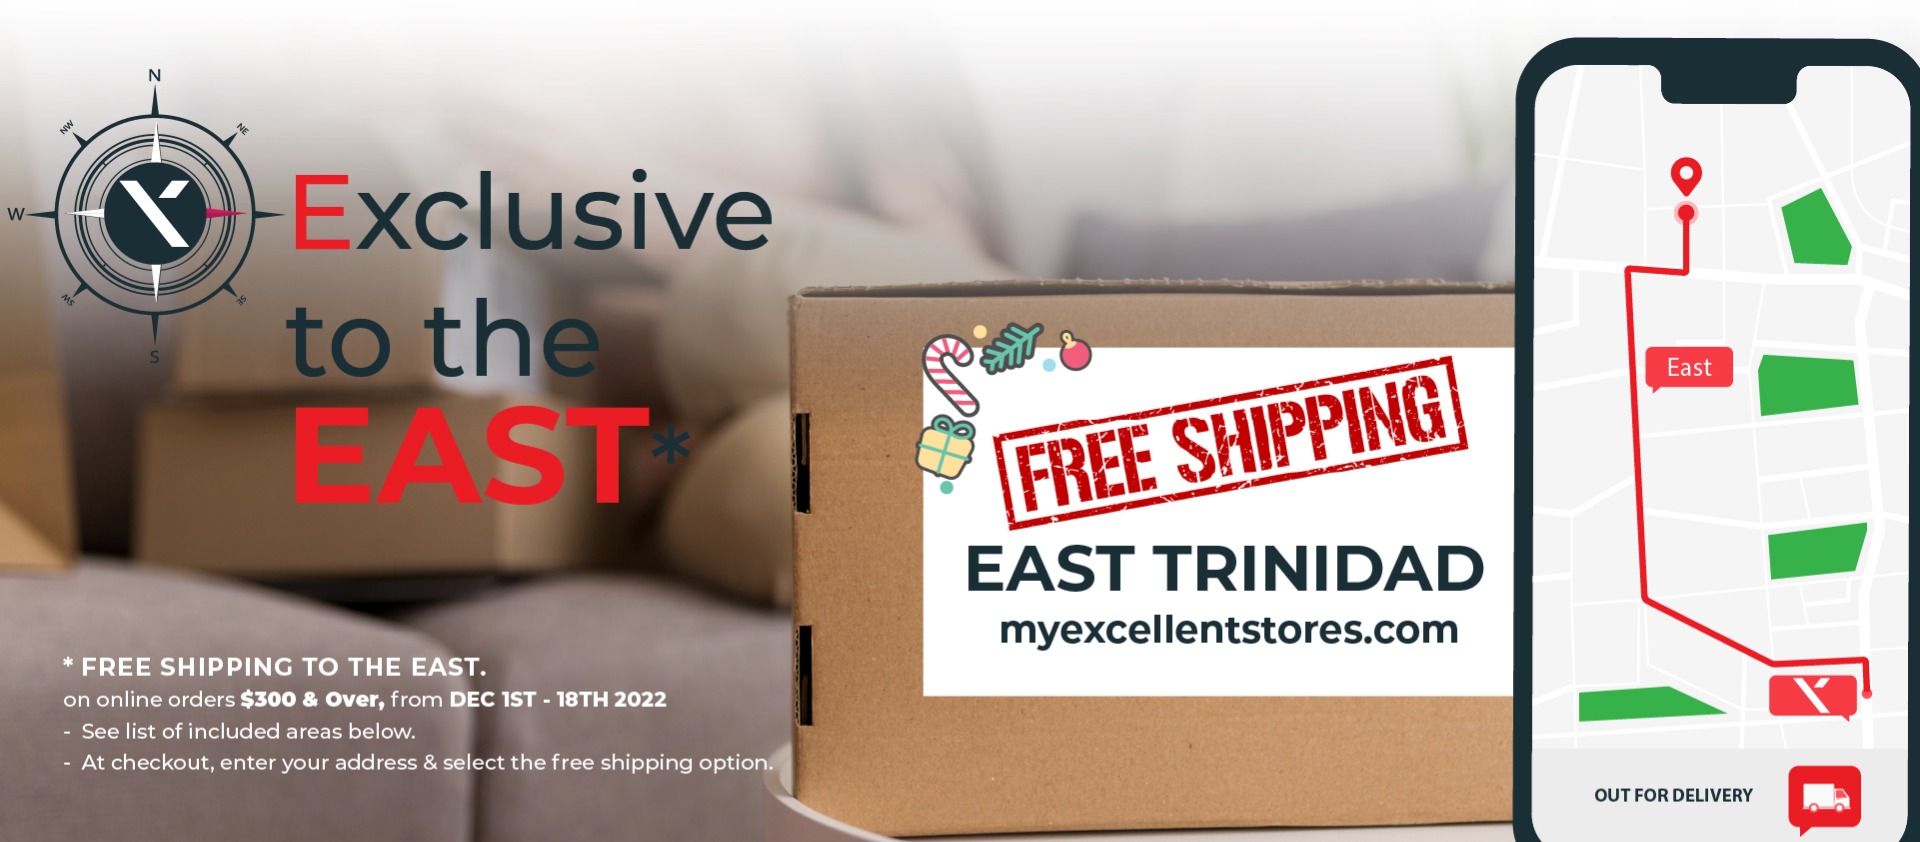 Free Shipping to the East